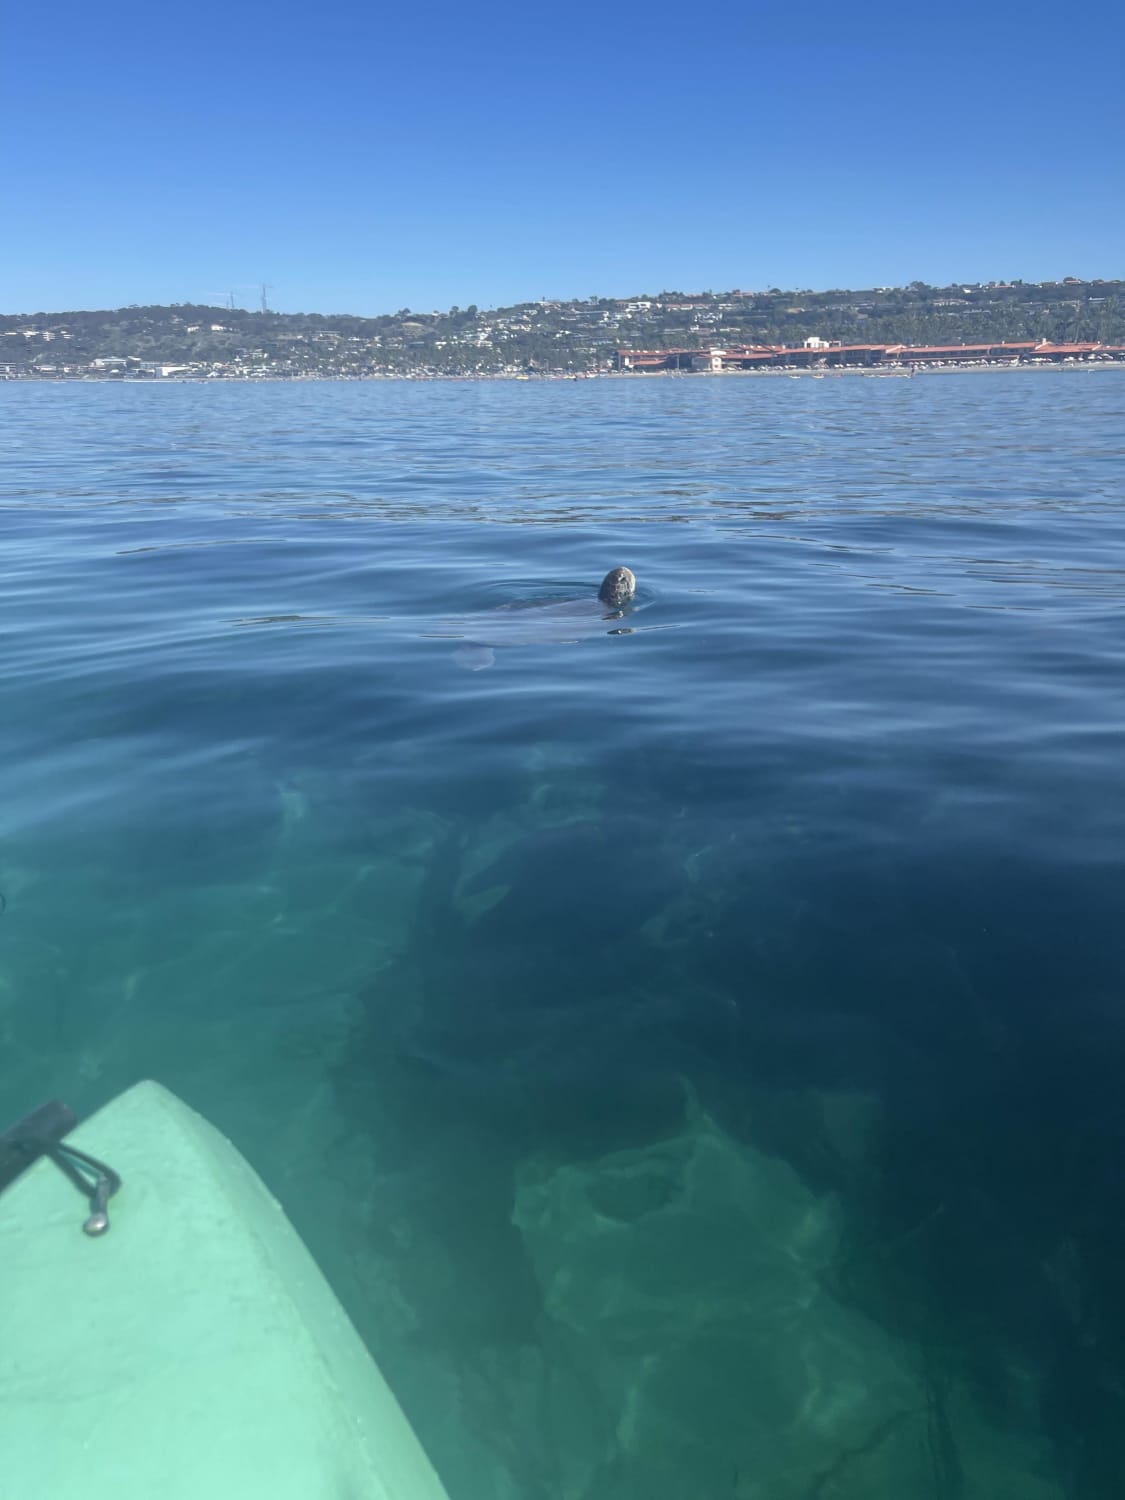 Sea turtle off La Jolla Shores! My partner and I brought our snorkel gear too so we can trade off manning the yak and seeing the animals!